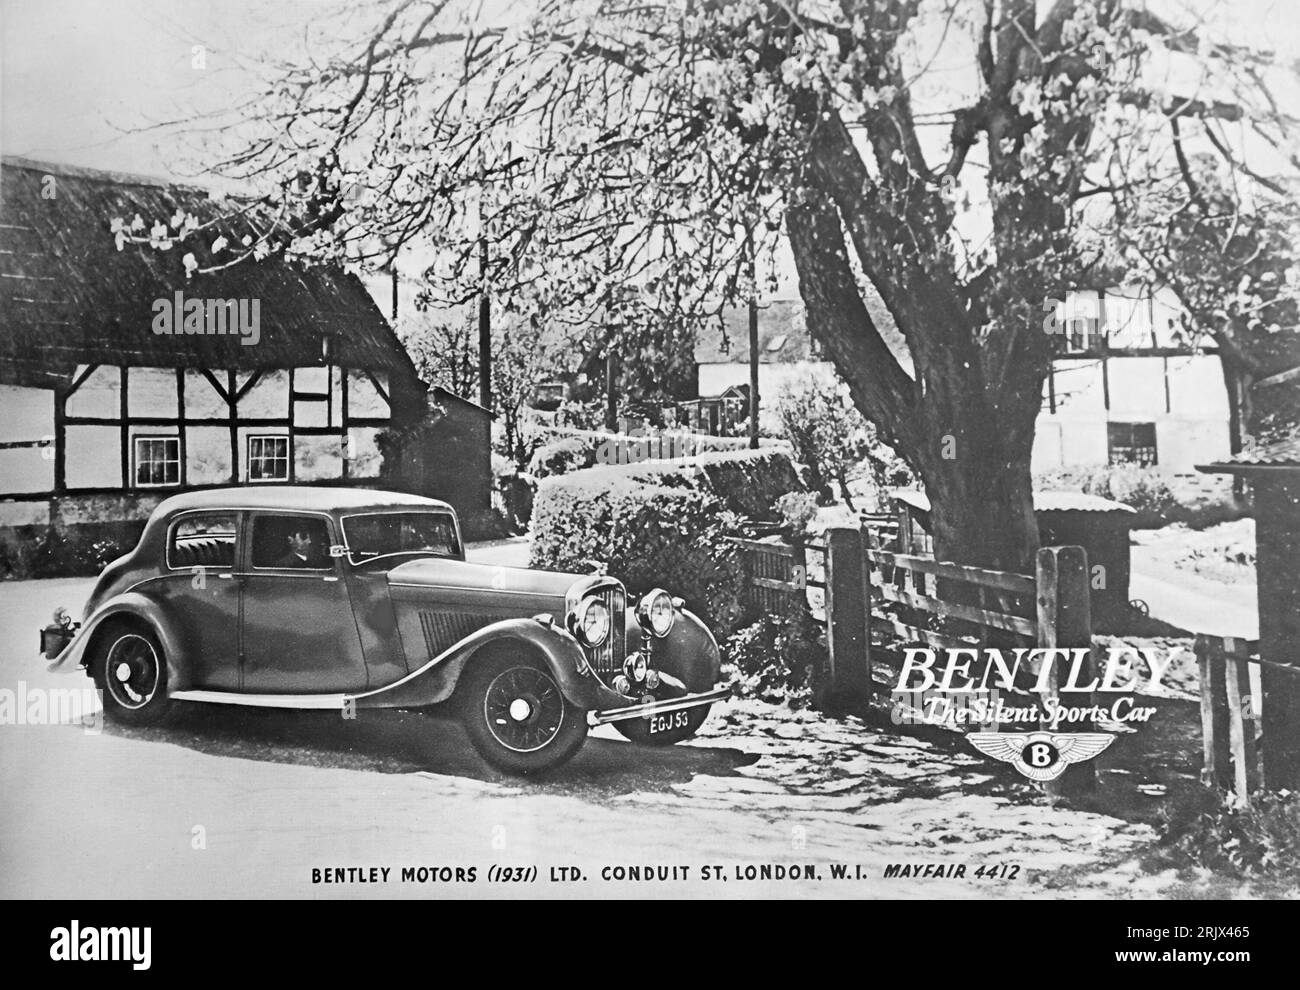 A 1941 advertisement for Bentley Motors  (1931) ltd. Bentley was and still is a designer and manufacturer of high end luxury cars. In 1931 Bentley was in financial difficulties and was acquired by Rolls Royce. Today Bentley is part of the Volkswagen Group Stock Photo